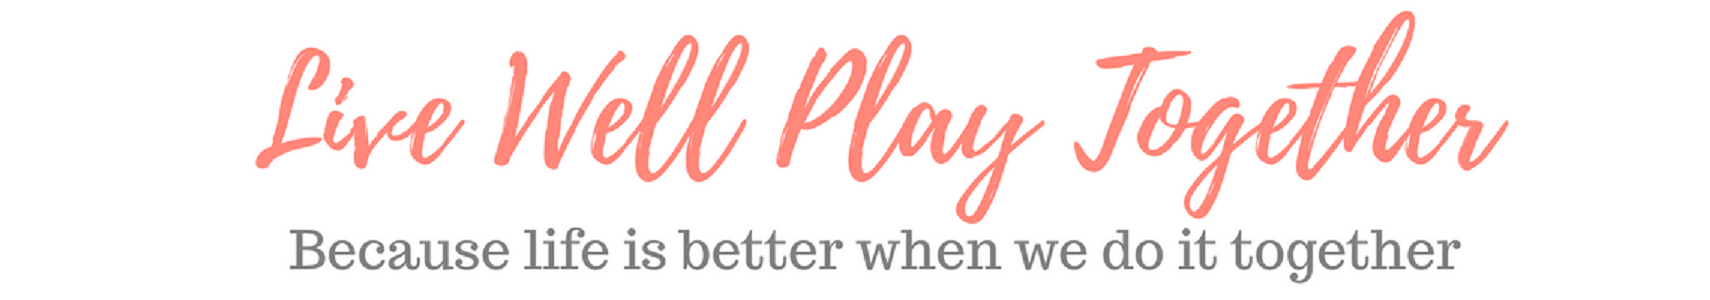 Live Well Play Together